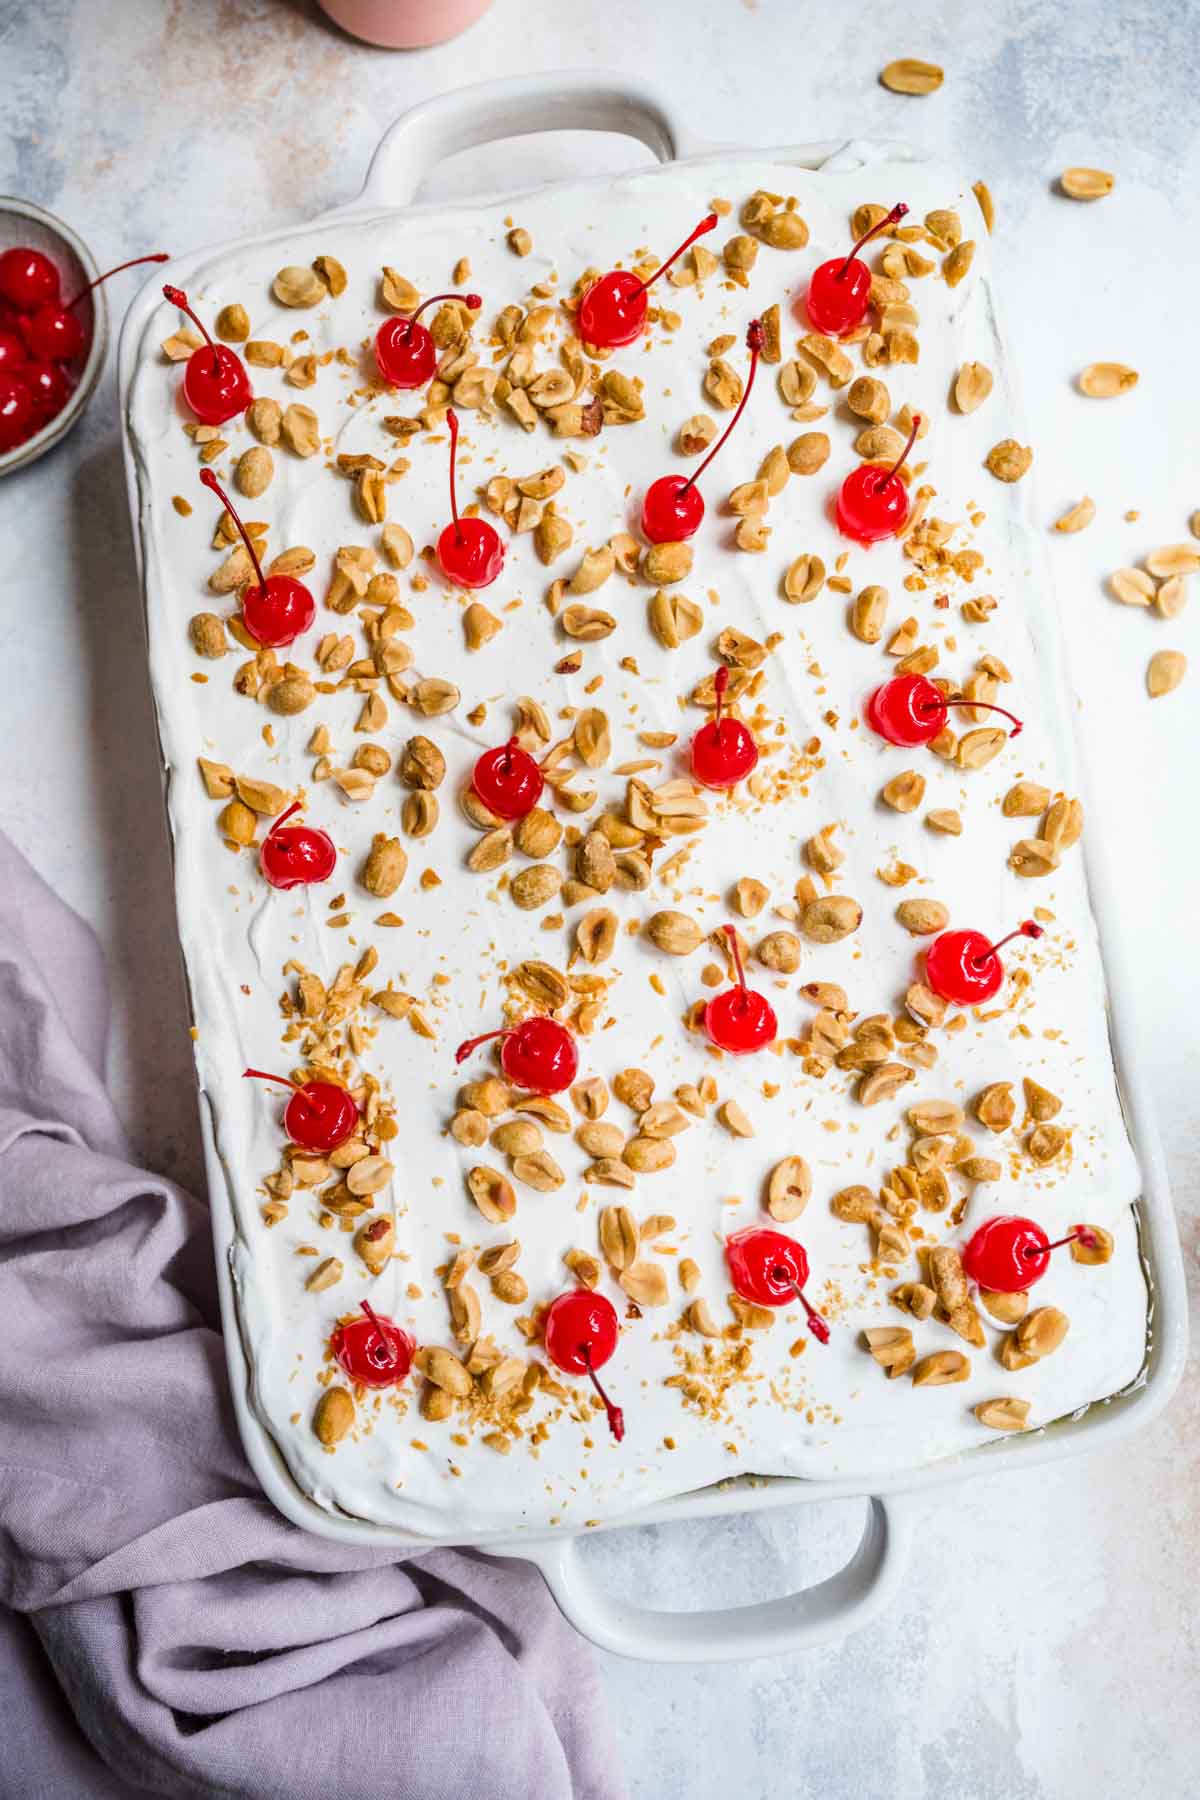 No-Bake Banana Split Dessert whipped topping, cherries and nuts on completed dish